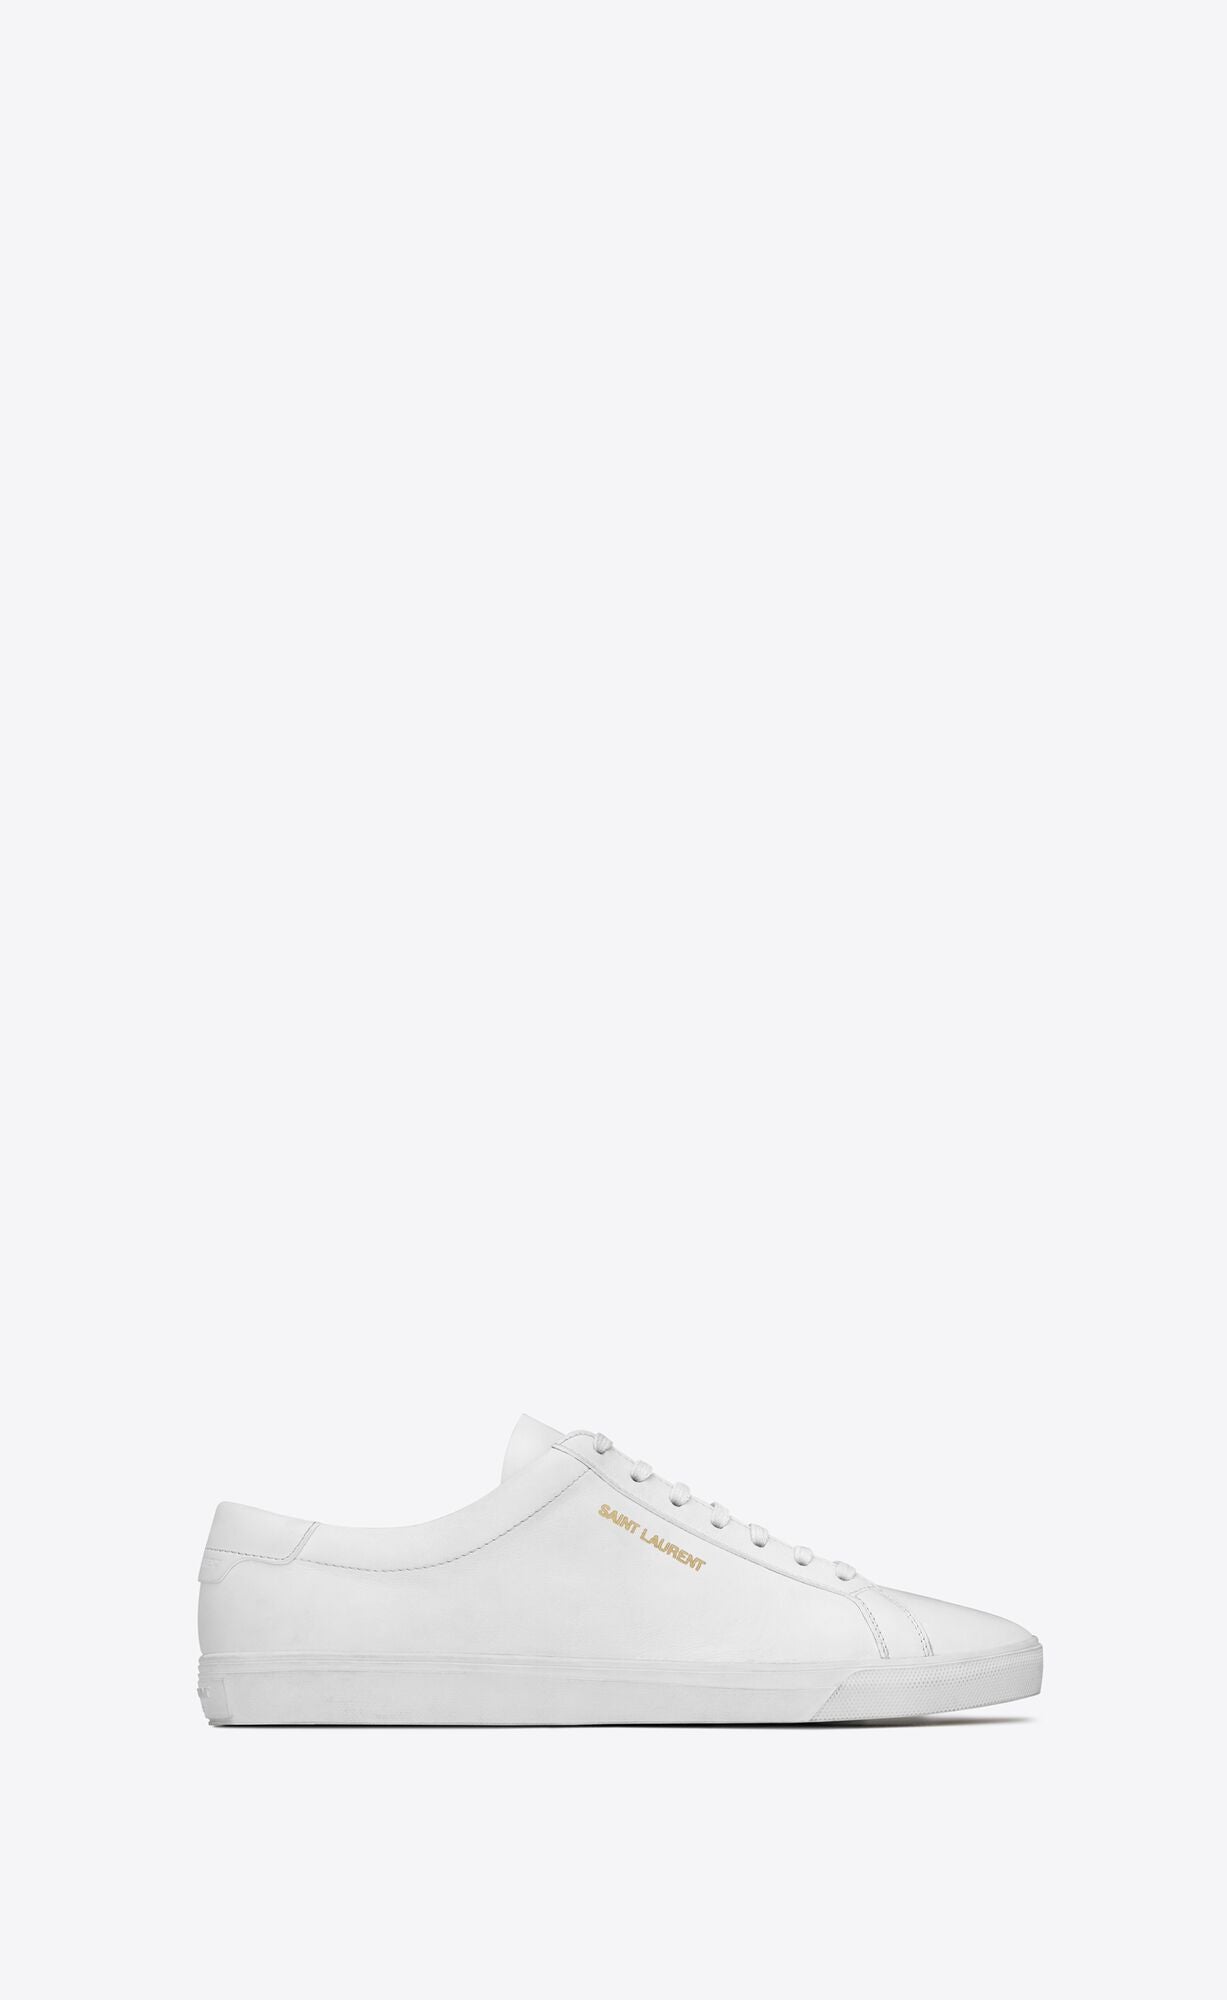 Saint Laurent + Andy sneakers in leather